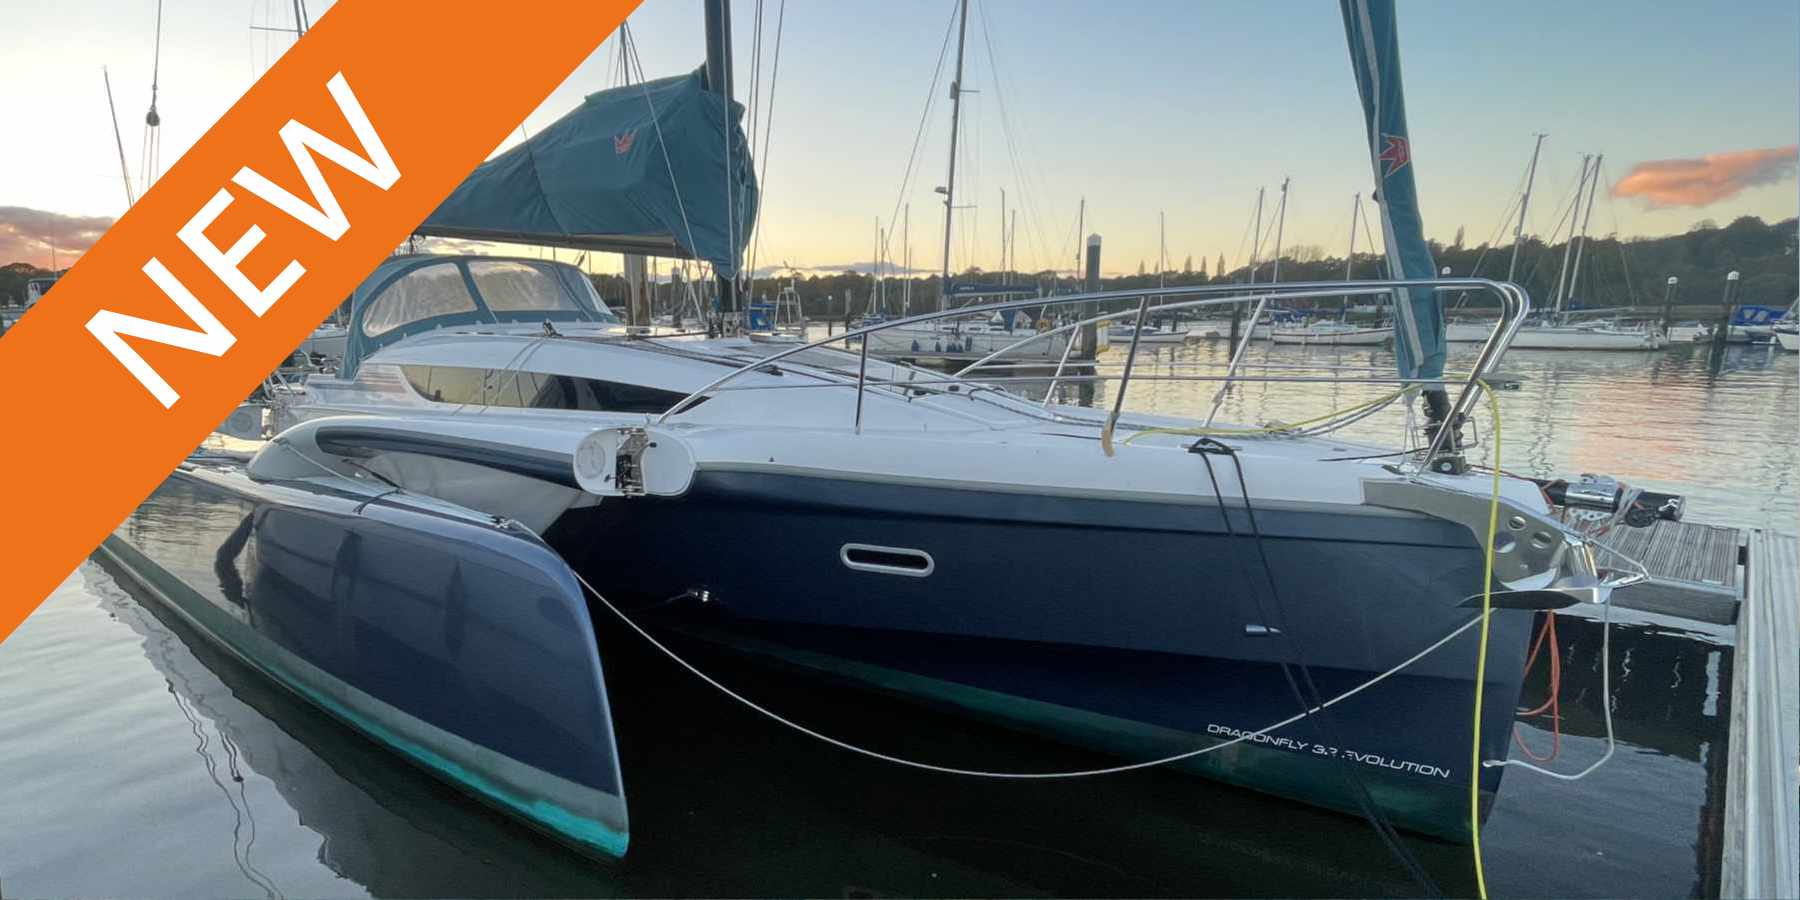 Dragonfly 32 for sale